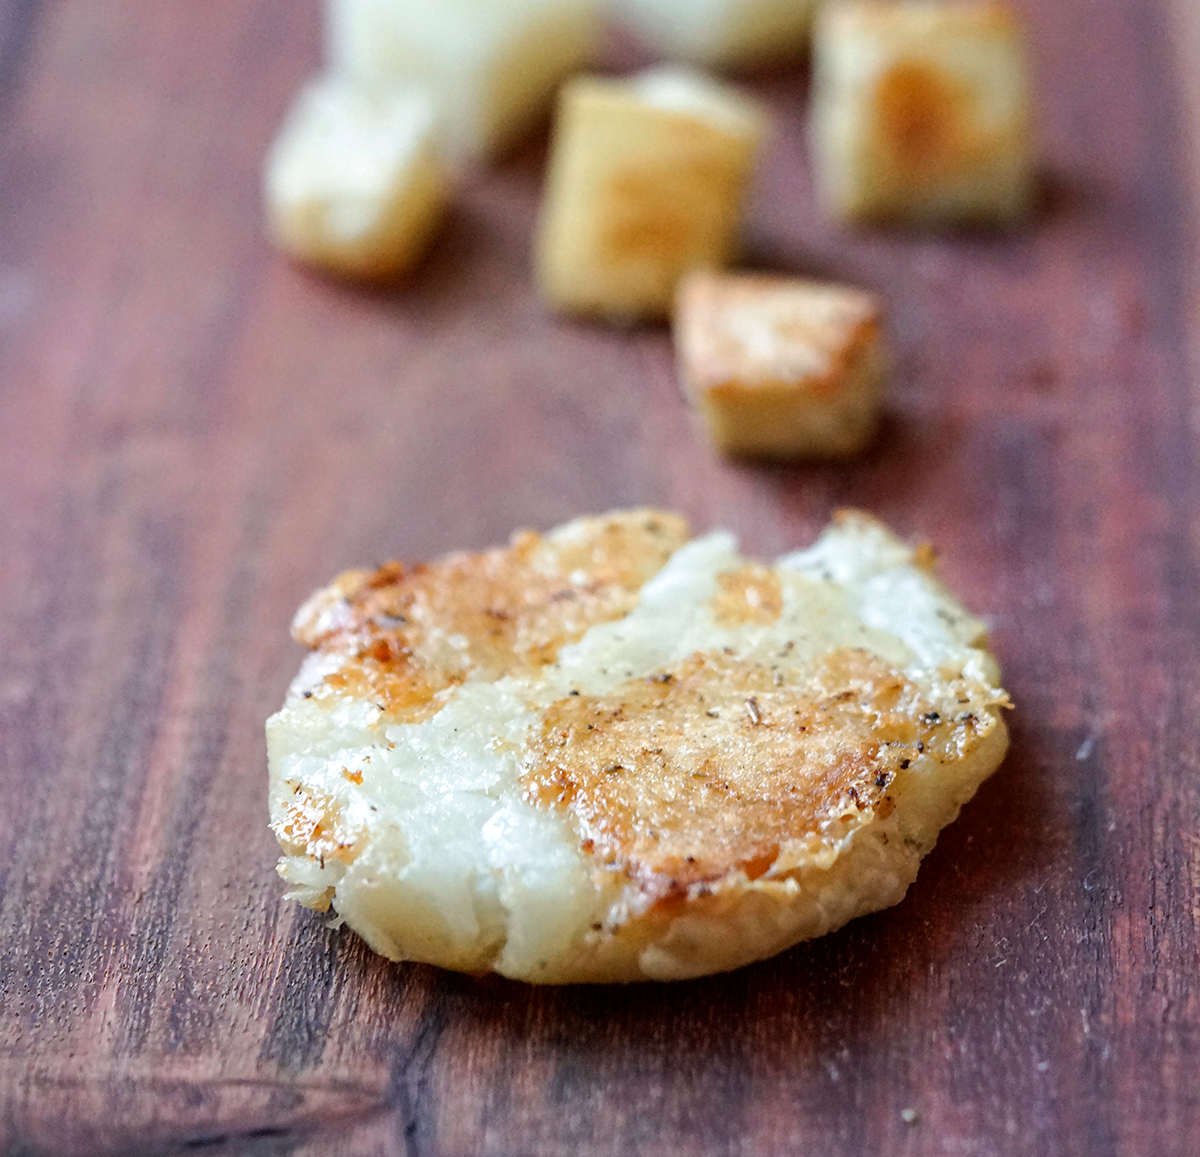 Smashed potato for baby as finger food: bake/roast whole small potatoes (peeled), and sprinkled with cheese.